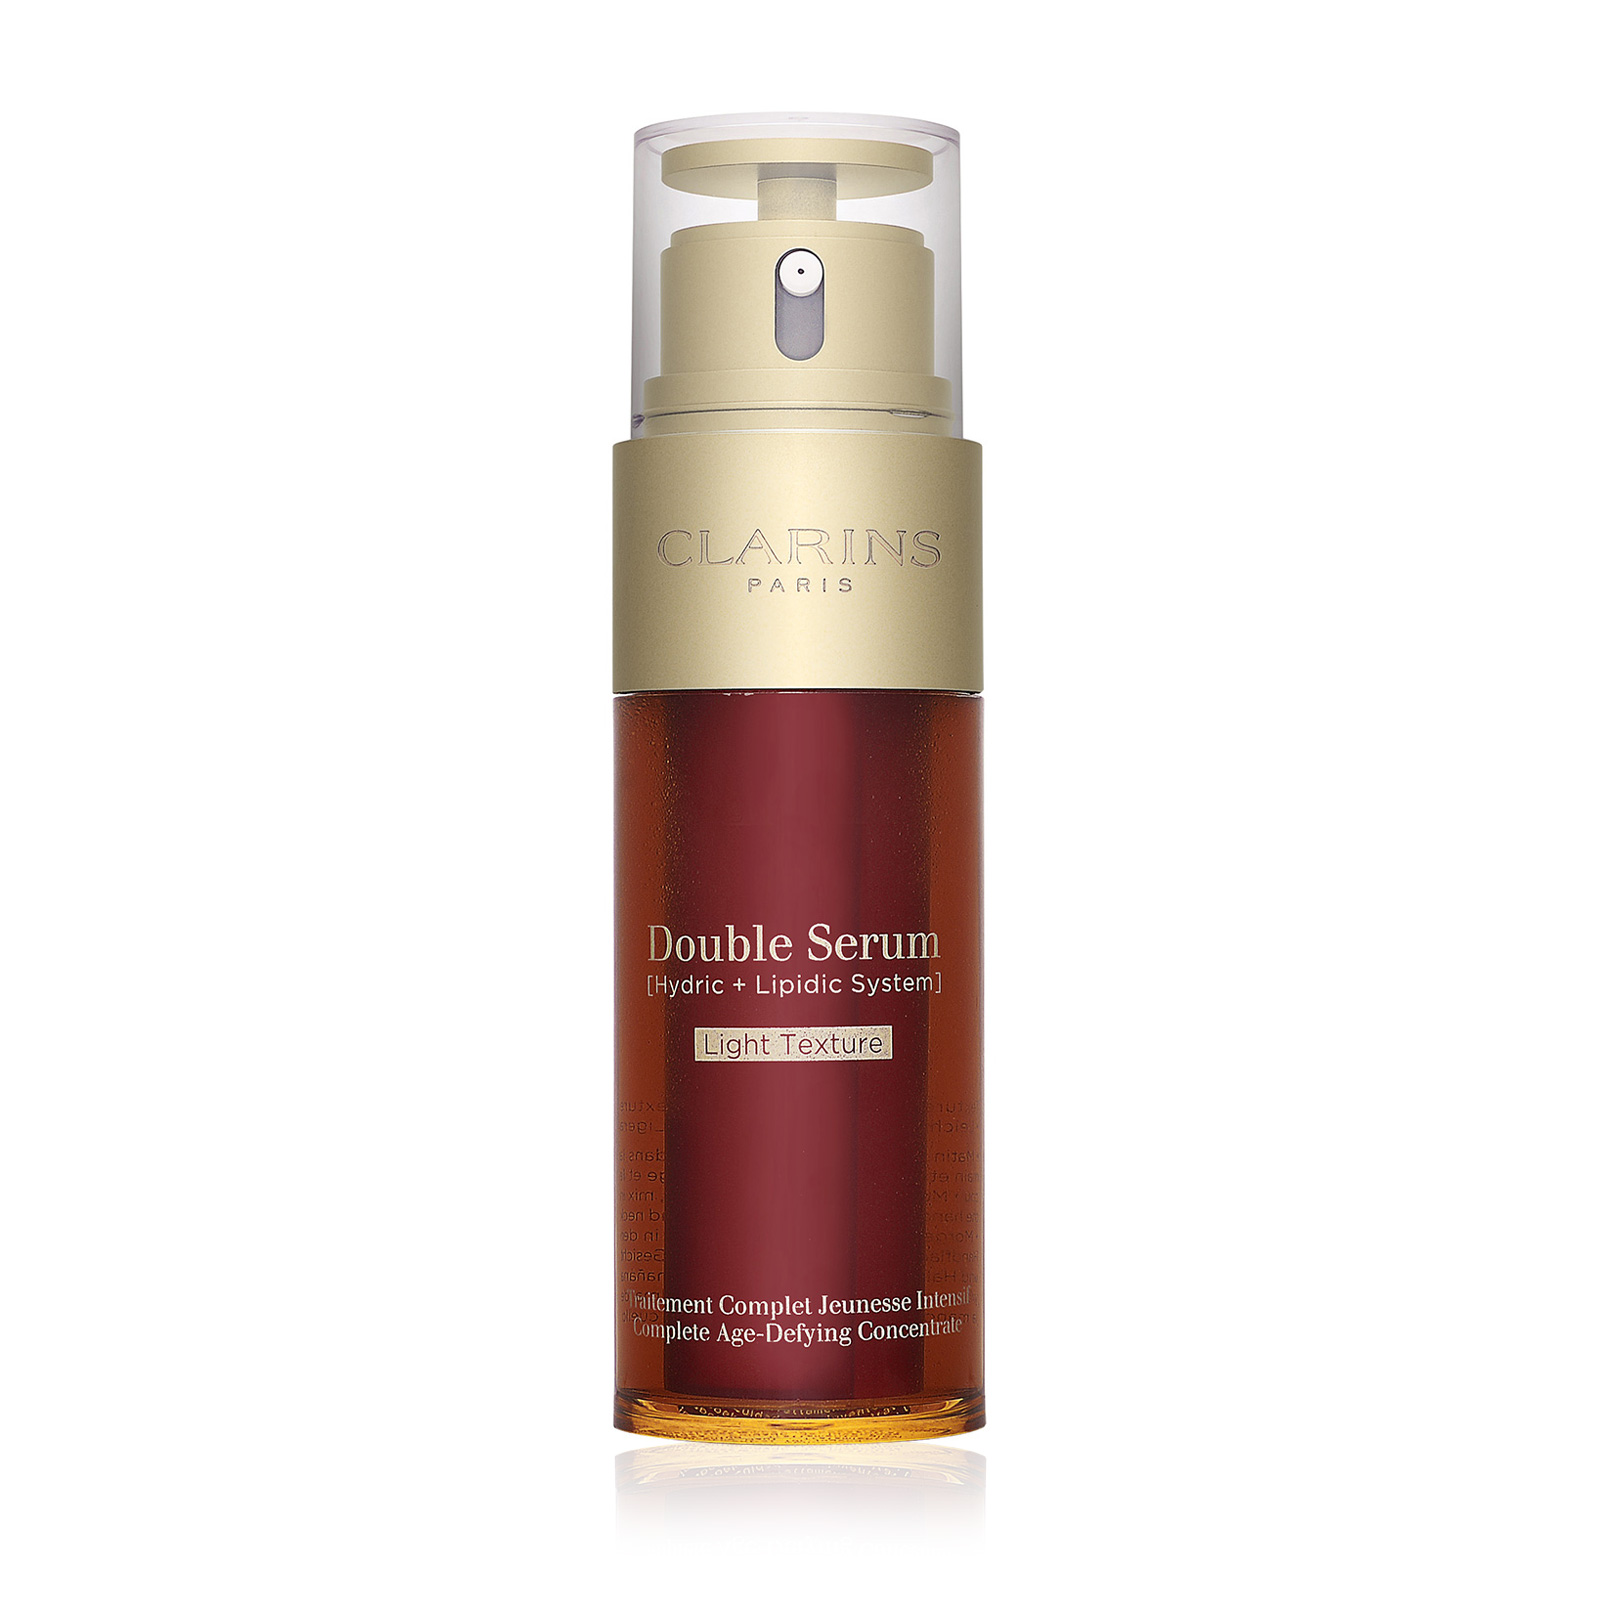 Double Serum [Hydric+Lipidic System] Complete Age Control Concentrate (Light Texture)